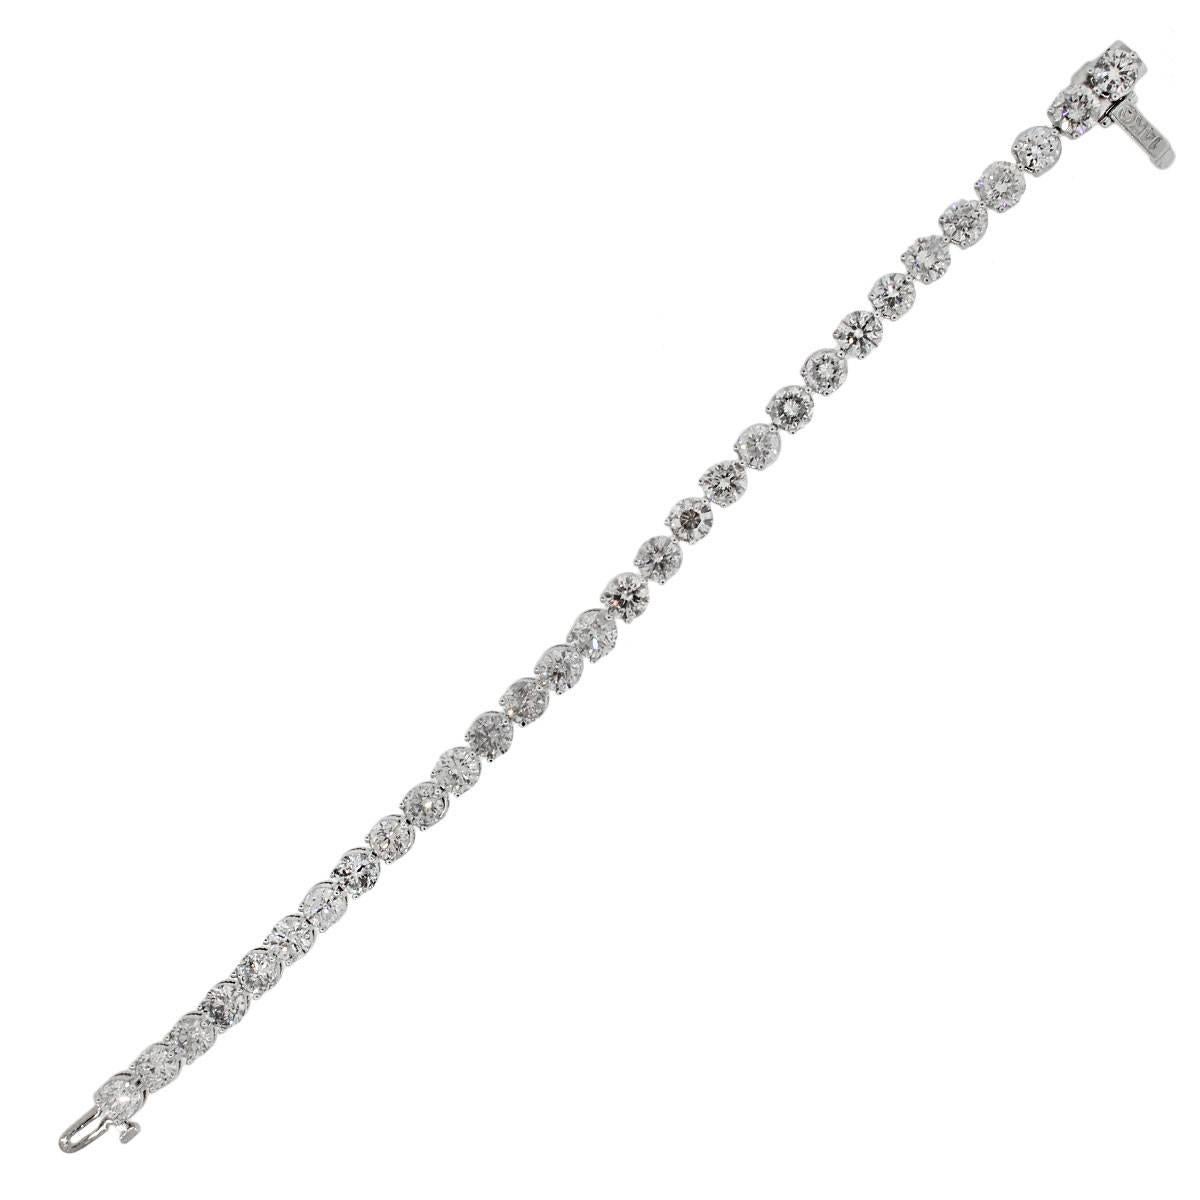 Material: 14k white gold
Diamond Details: 30 Diamonds that are approximately 12.67ctw white round diamonds. Diamonds are J-L  promotional quality.
Clasp: Tongue in box Clasp
Total Weight: 18.2g (11.7dwt)
Measurements: will fit up to a 6.5